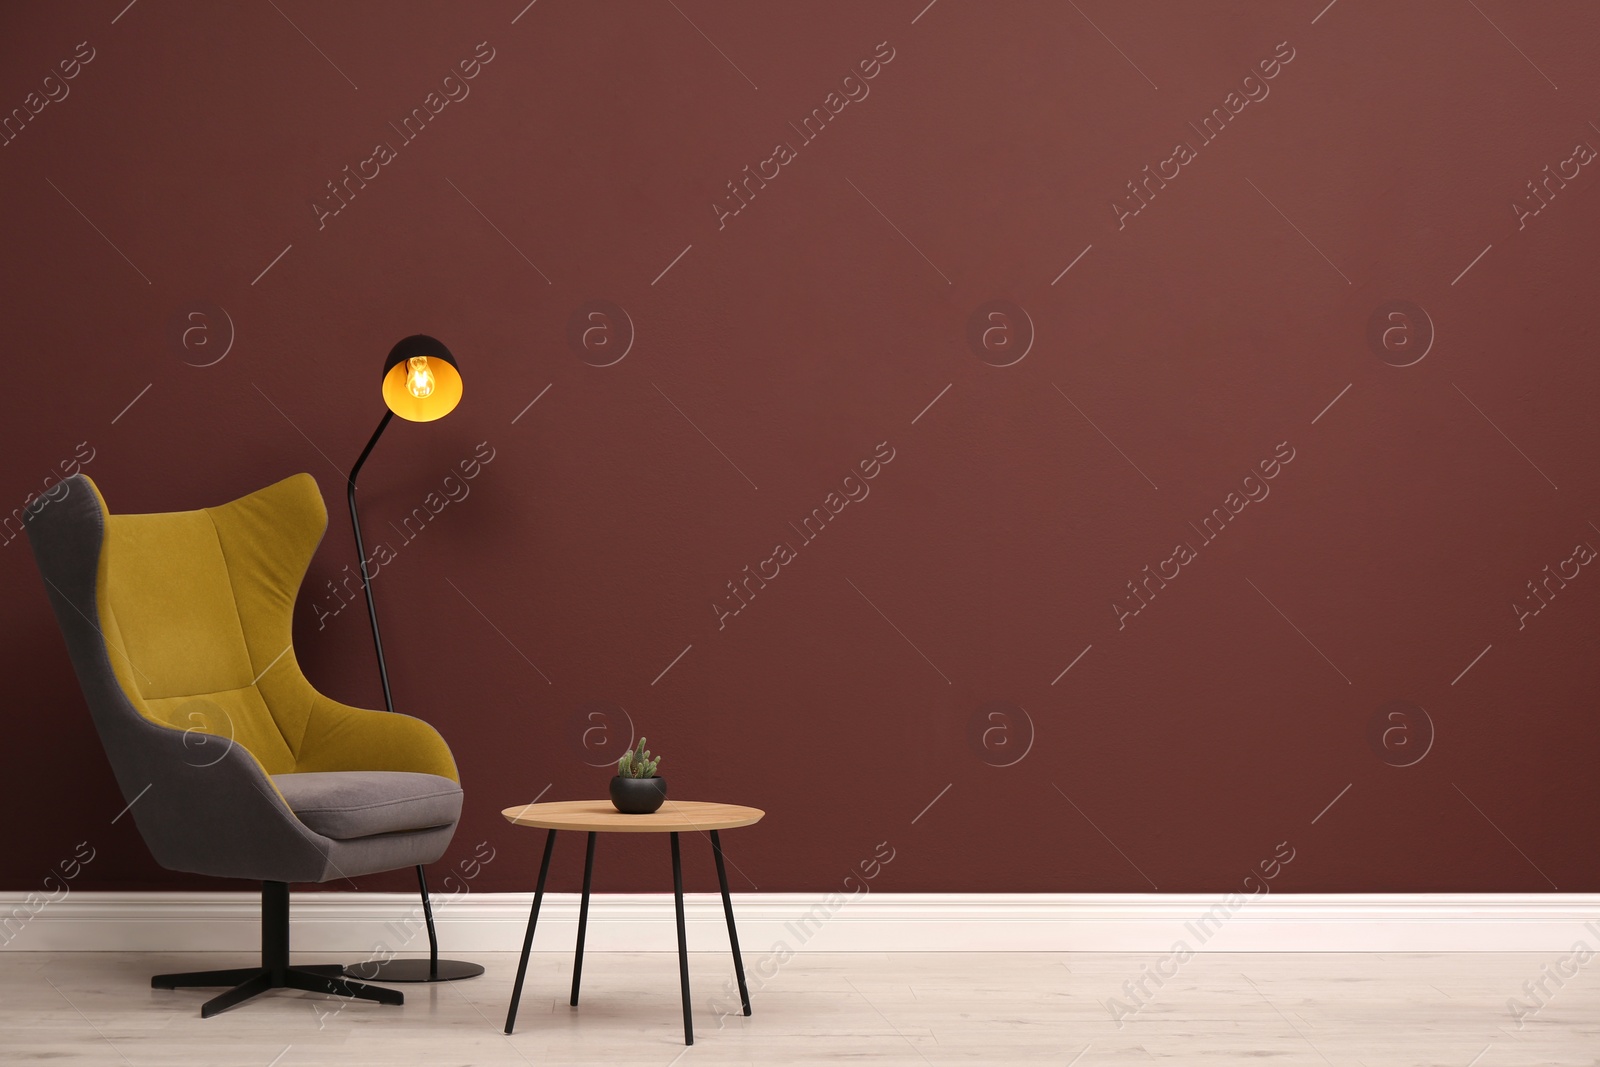 Photo of Stylish armchair, table and lamp near brown wall, space for text